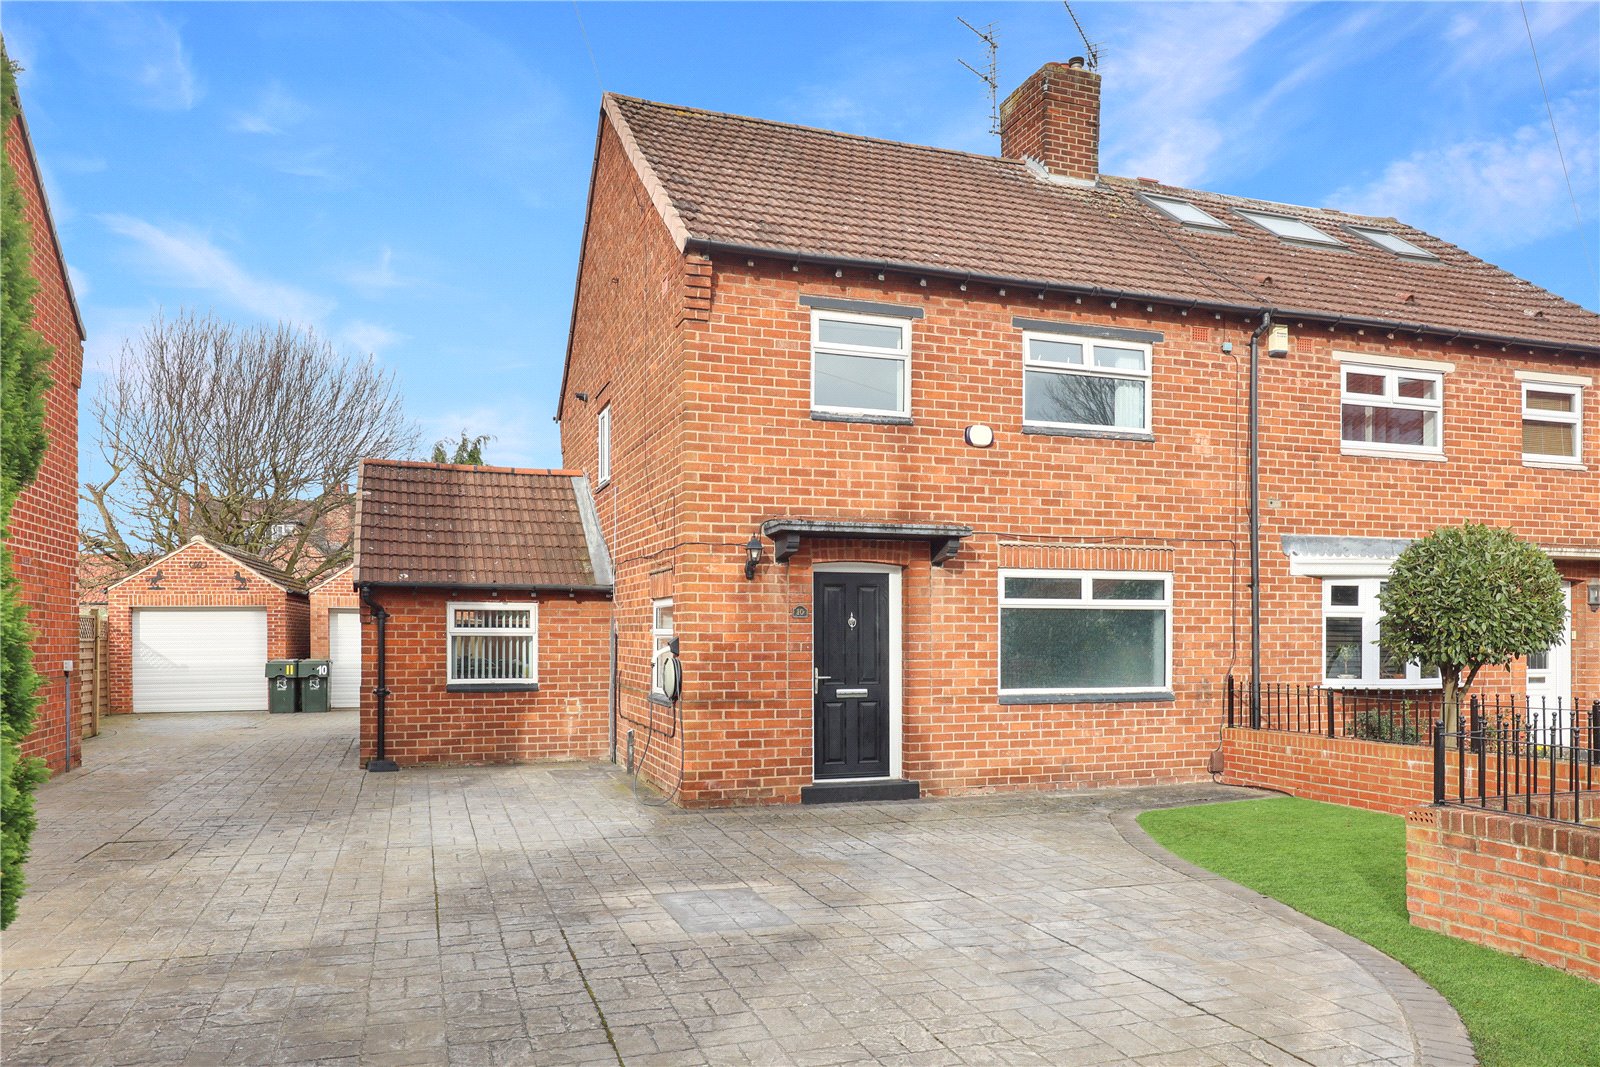 3 bed house for sale in Church Close, Stainton 1